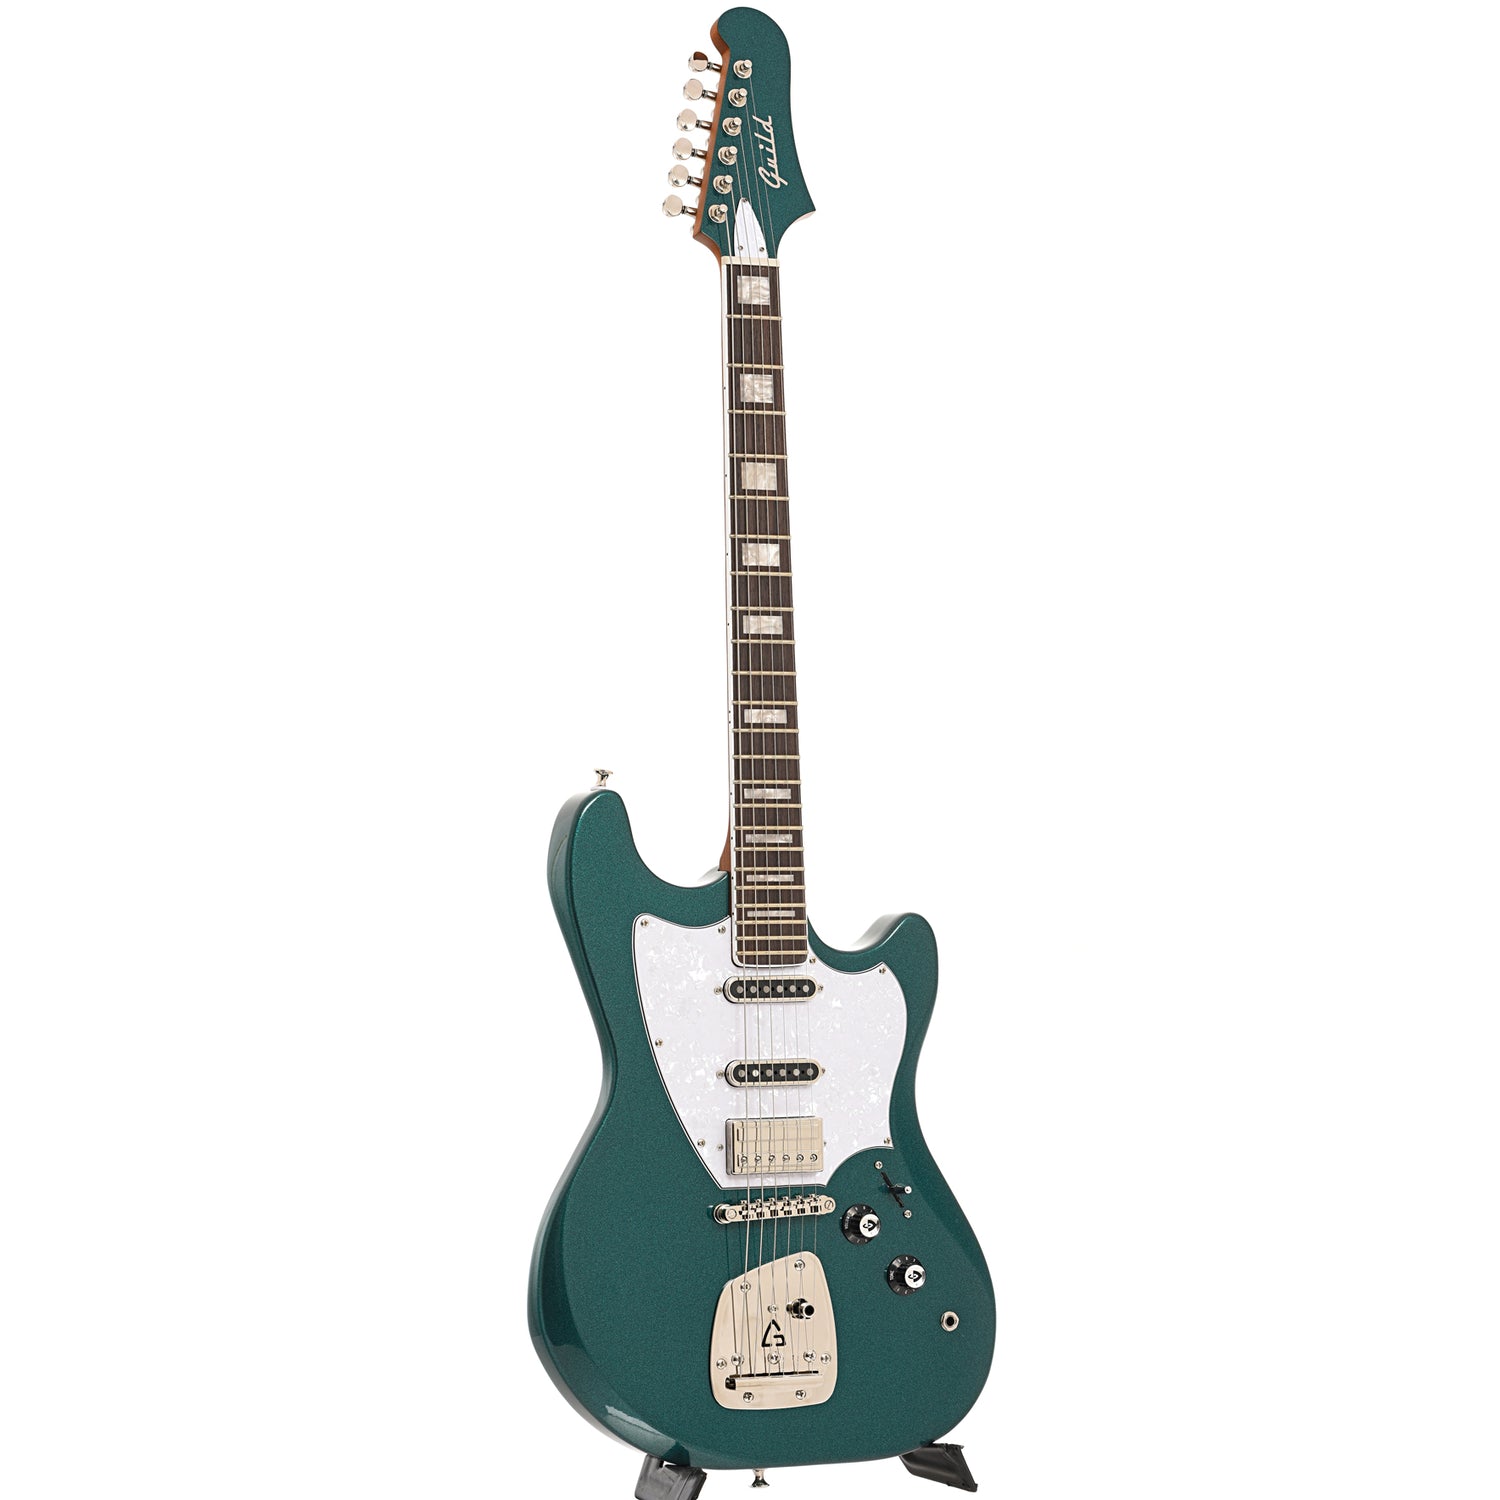 Full front and side of Guild Surfliner Deluxe Electric Guitar, Evergreen Metallic